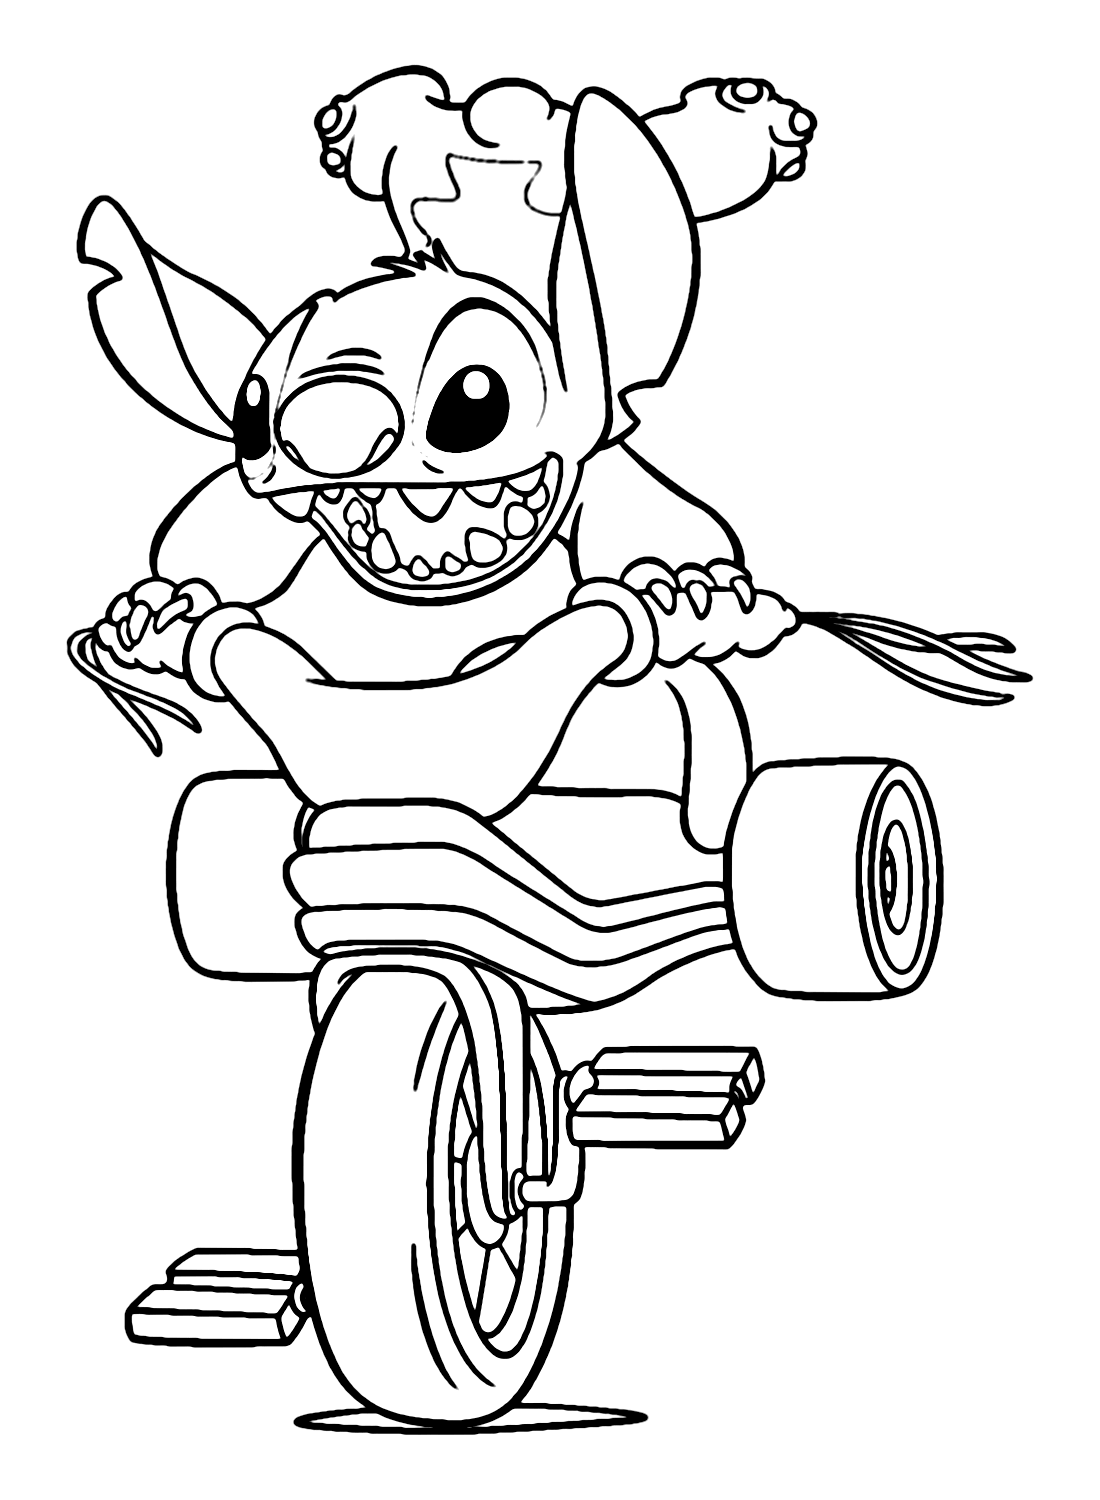 Printable Cute Stitch Coloring Pages Coloring Page Free Printable 9880